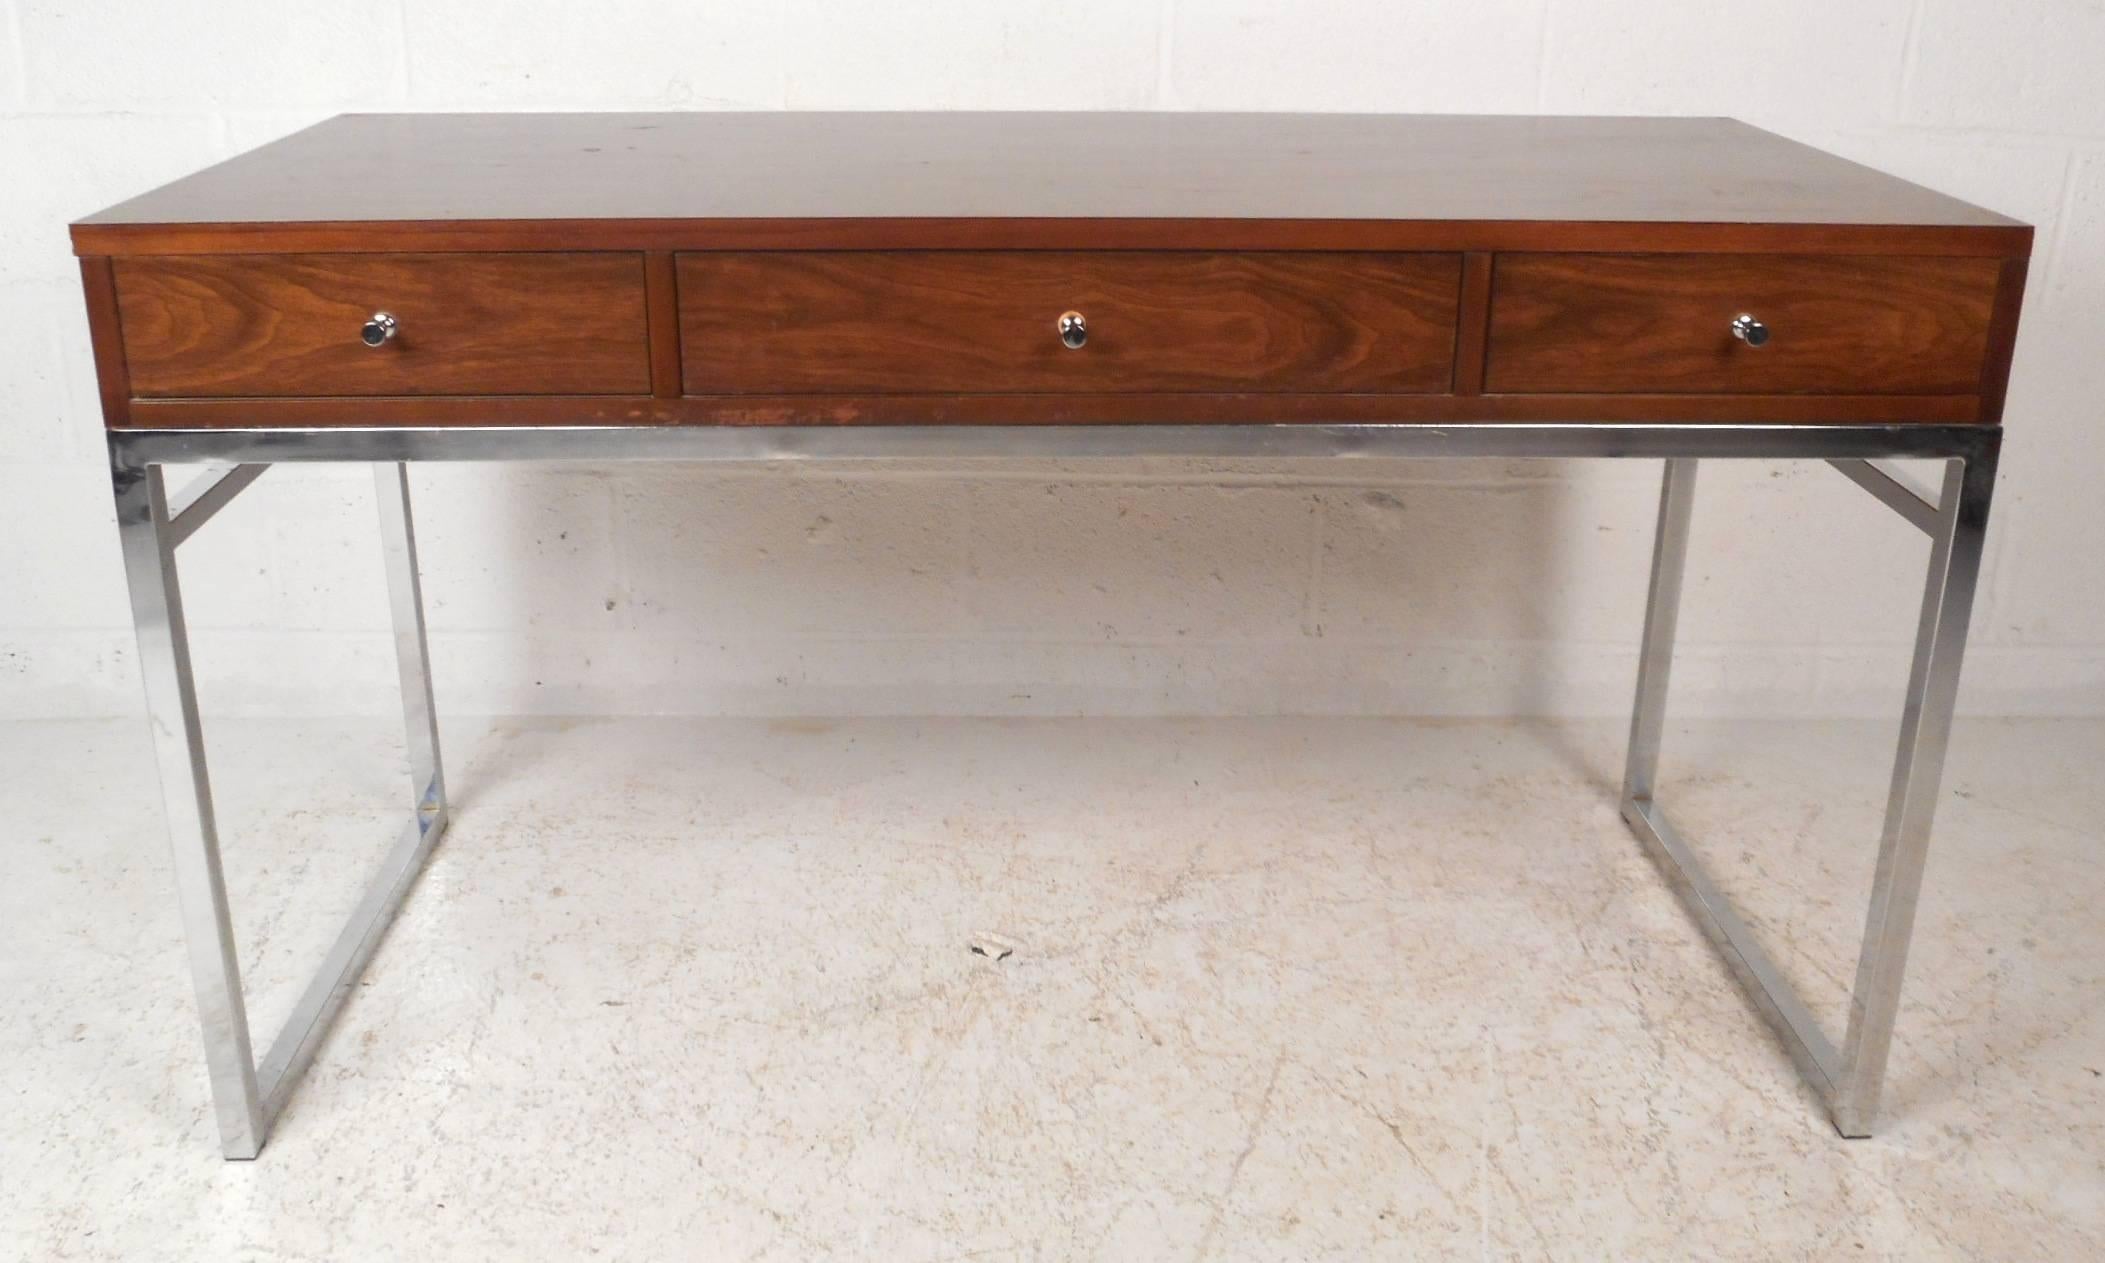 This gorgeous vintage modern desk is designed in the style of Milo Baughman. This stylish and sturdy piece sits on a heavy chrome frame with boxed sides. Unique design has three large drawers with unusual chrome pulls. This versatile desk has a